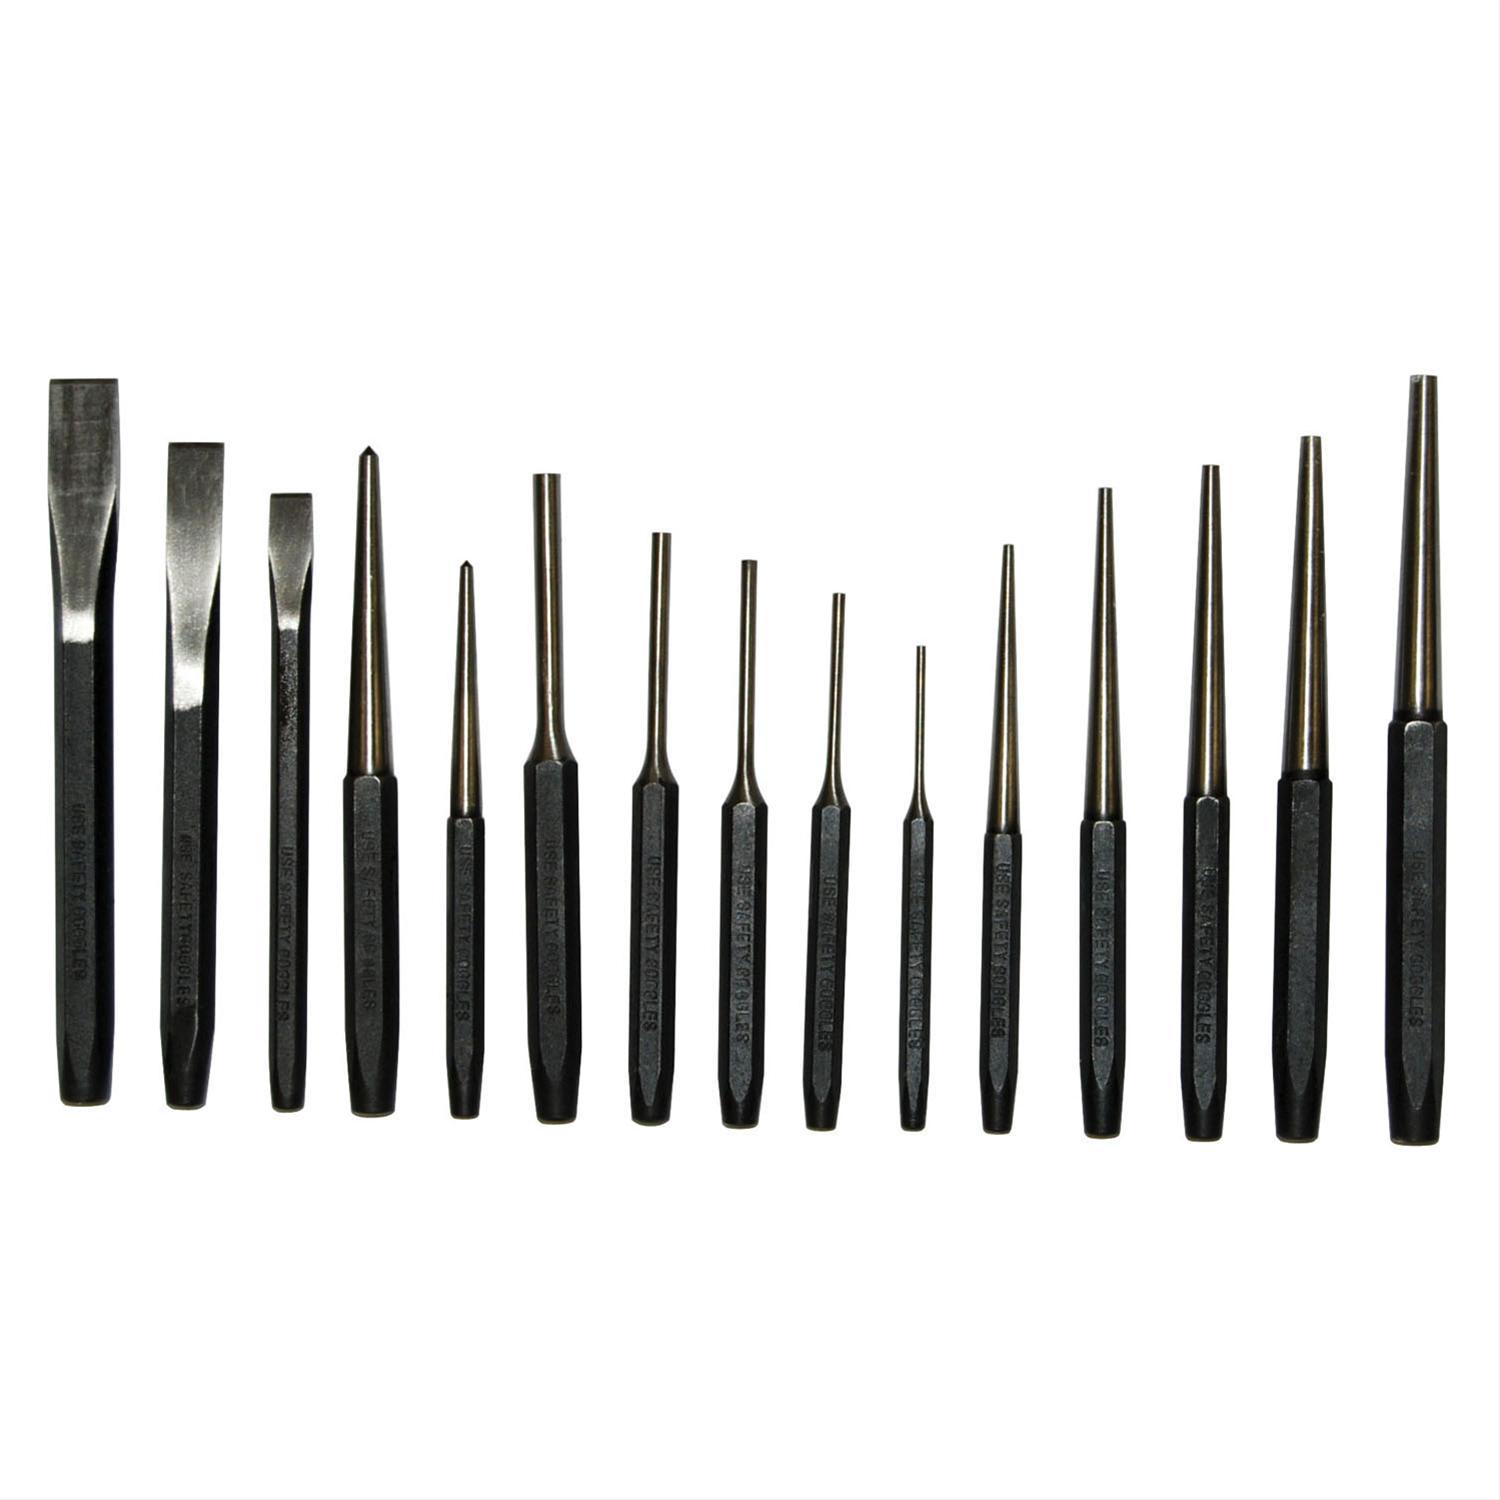 OEMTOOLS 25515 16 Piece Punch and Chisel Set, Punch Set, Pin Punch